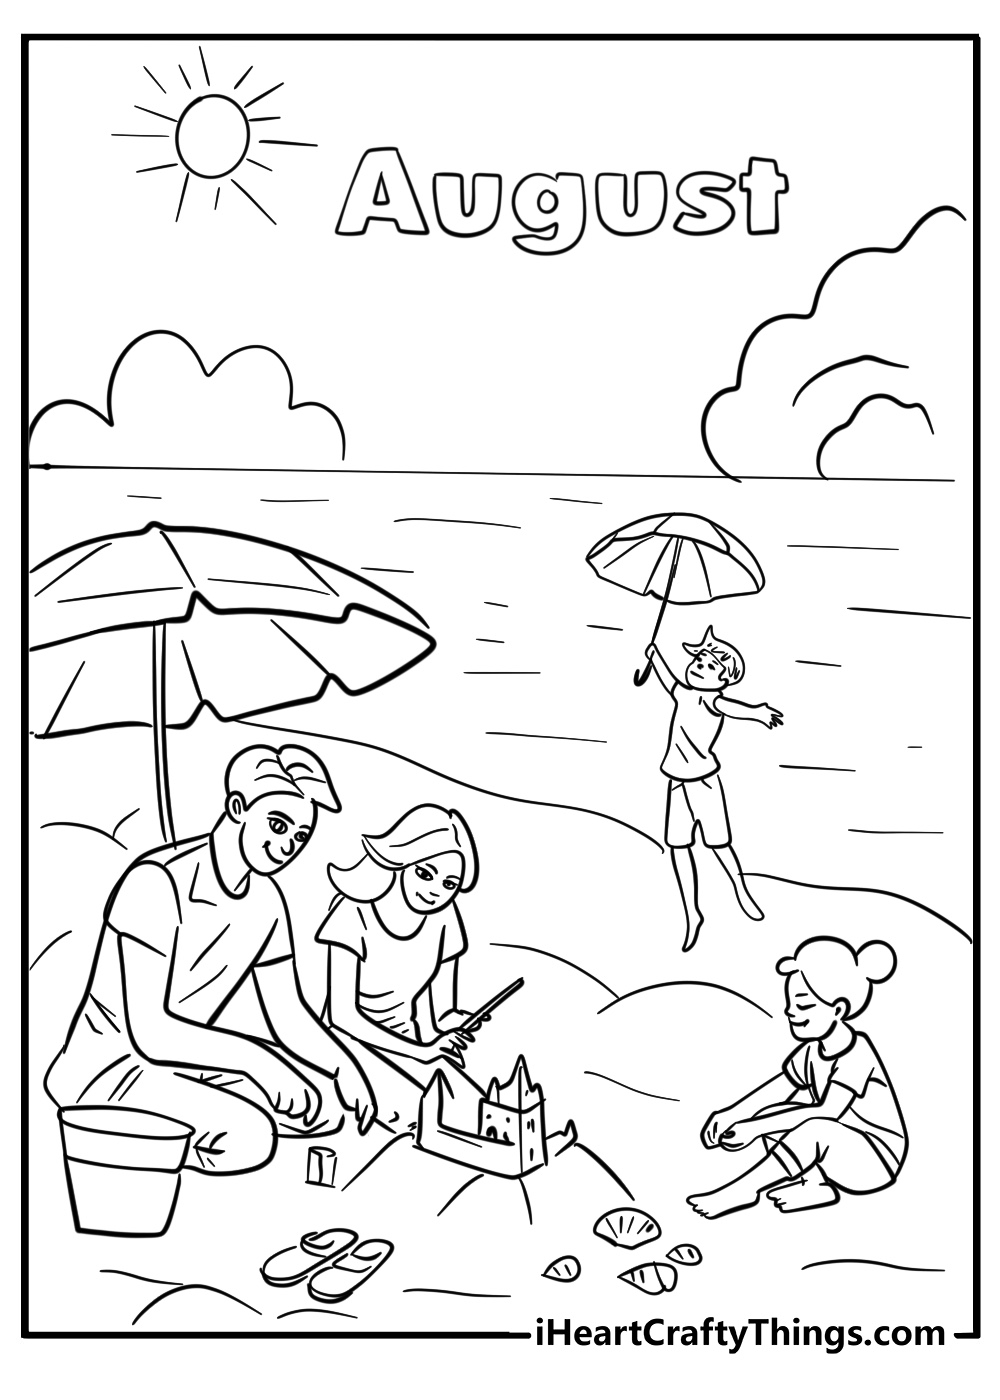 Family at the beach in august